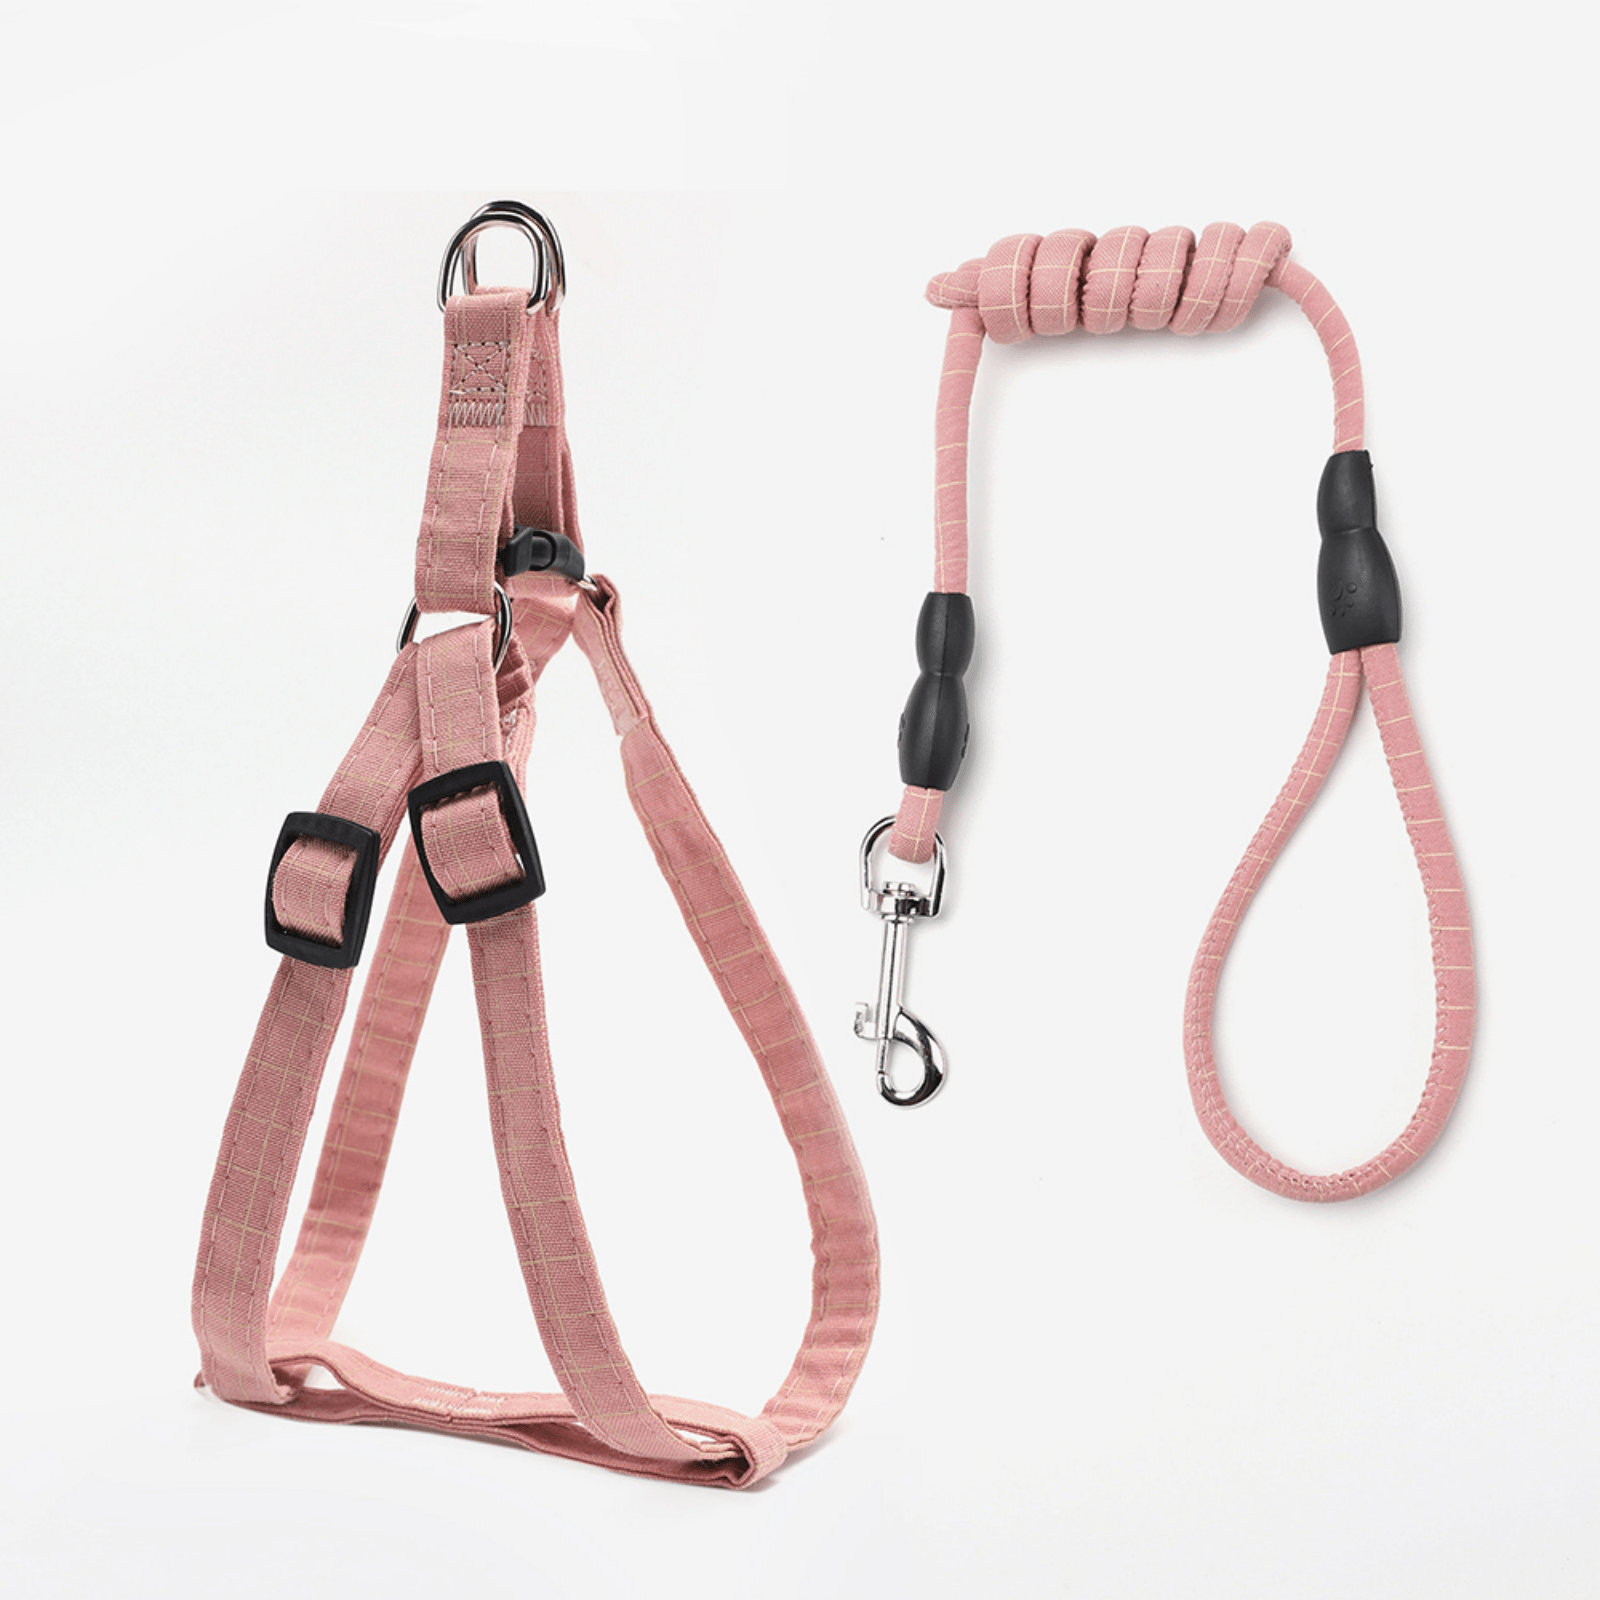  LUOZZY 3 in 1 Toddler Harness Leashes + Anti Lost